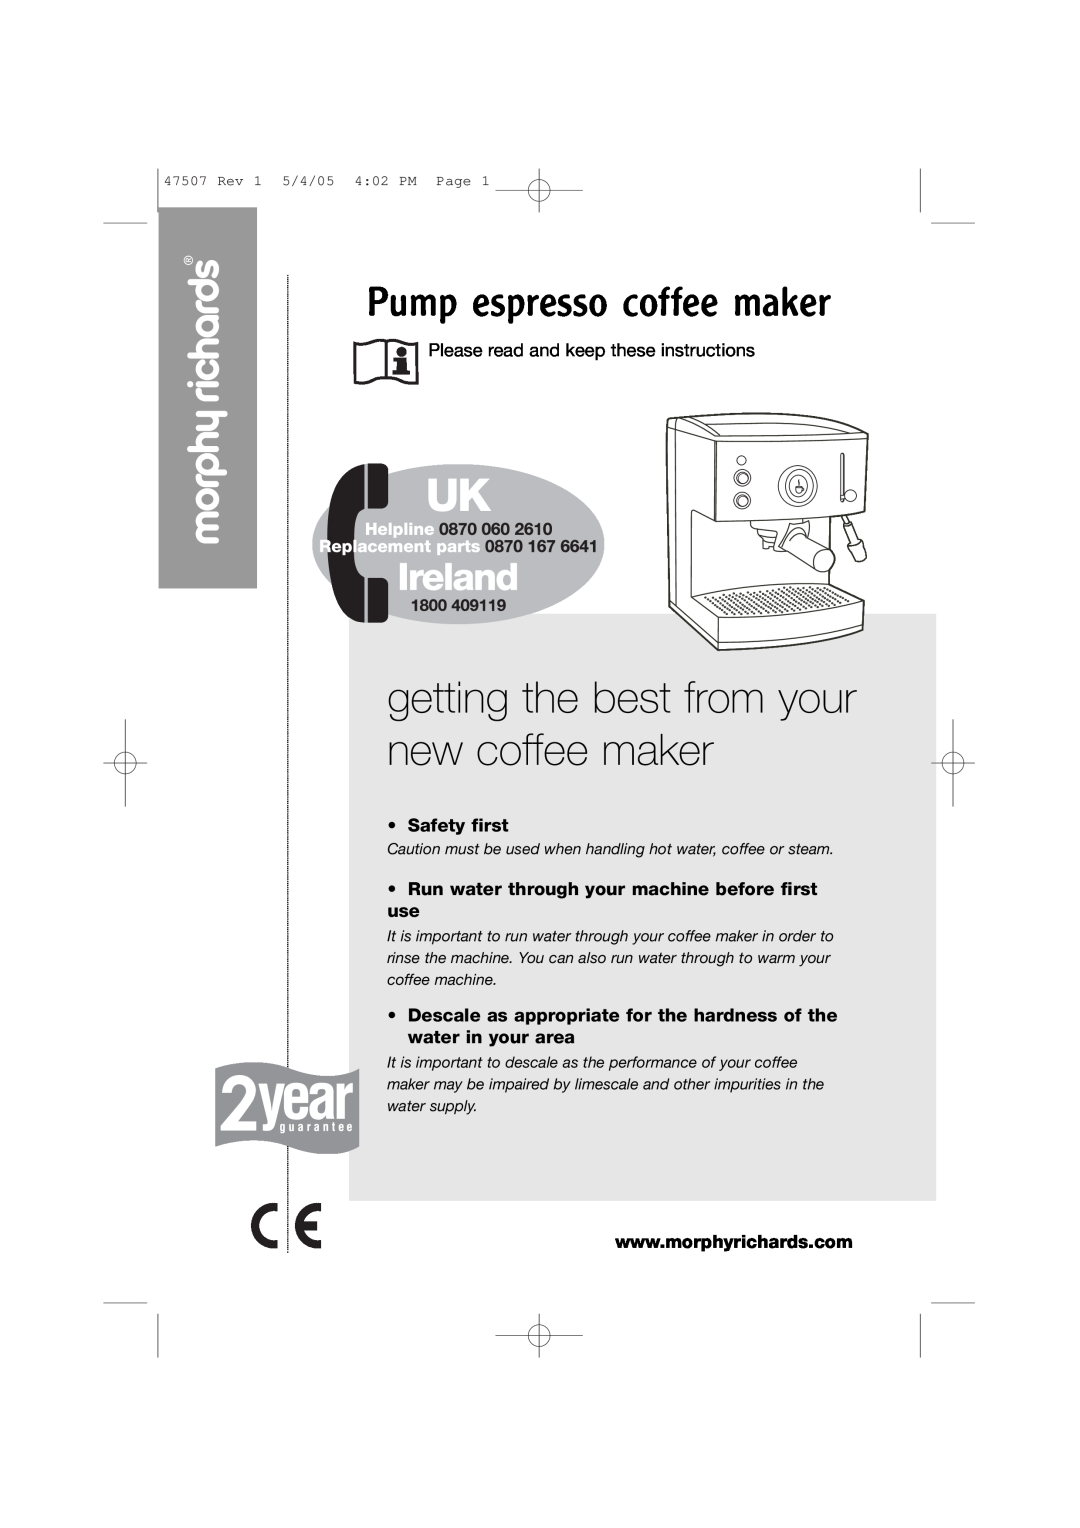 Morphy Richards CoffeMaker manual Pump espresso coffee maker, getting the best from your new coffee maker, Safety first 